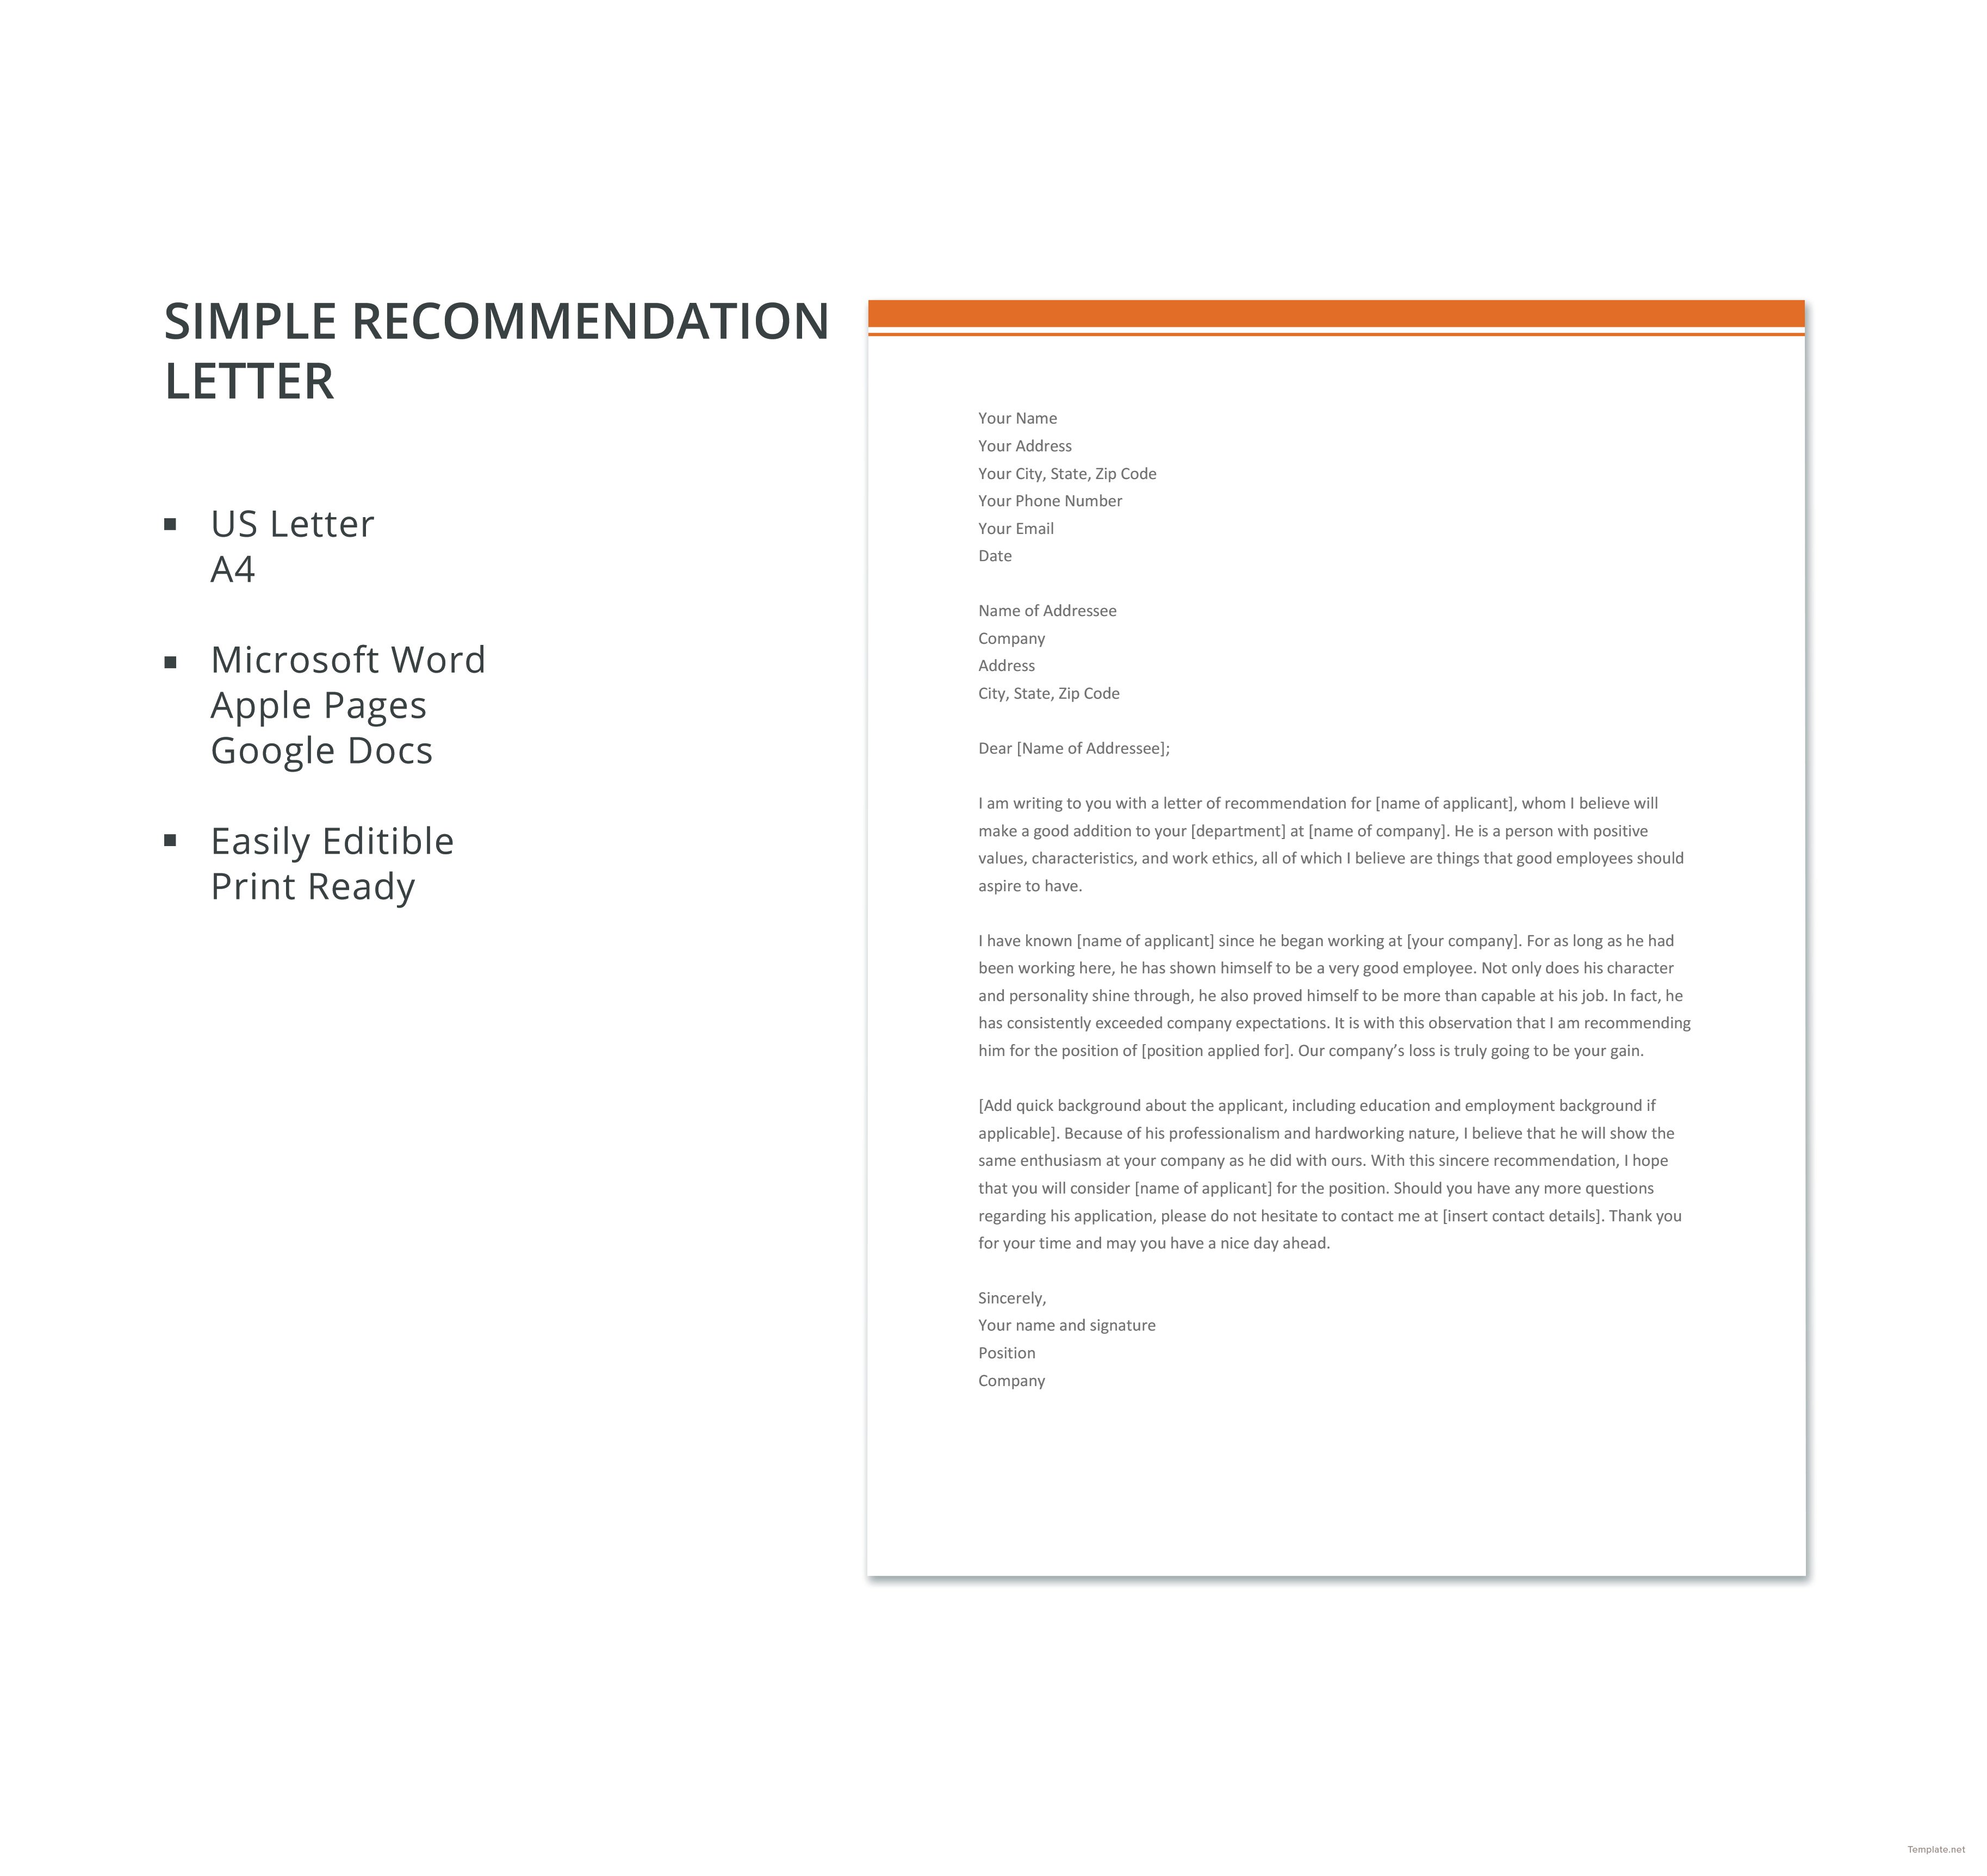 Simple Letter Template in Microsoft Word, Apple Pages